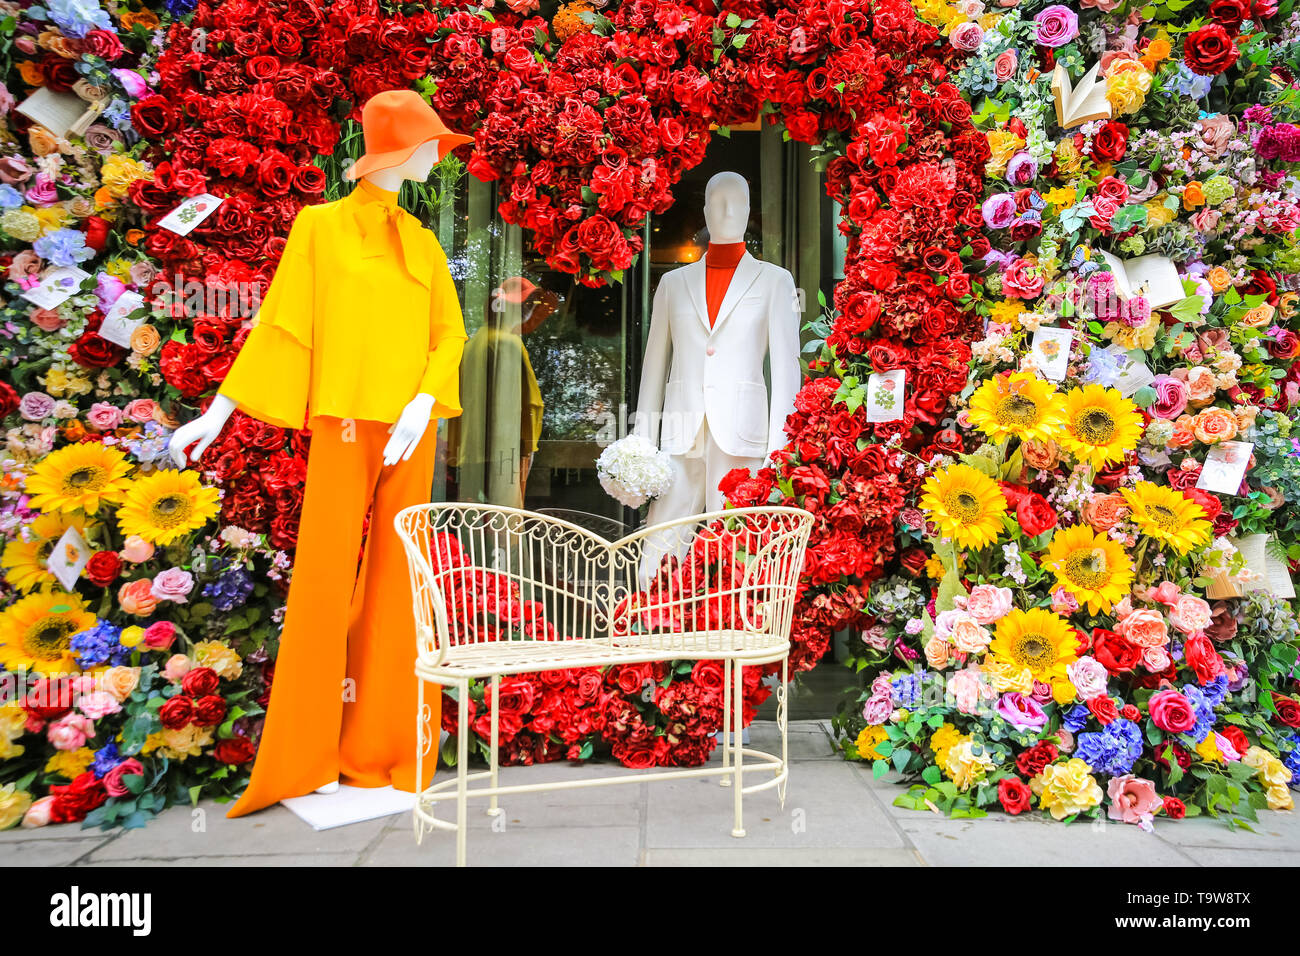 2019.Belgravia, London, UK, 20th May 2019. The Hari Hotel has created a spectacular heart shaped floral display with sixties inspired figures and a love seat, which is popular with passers-by taking photos. Belgravia's fourth annual floral festival coincides with the RHS Chelsea Flower Show in neighbouring Chelsea. Credit: Imageplotter/Alamy Live News Stock Photo